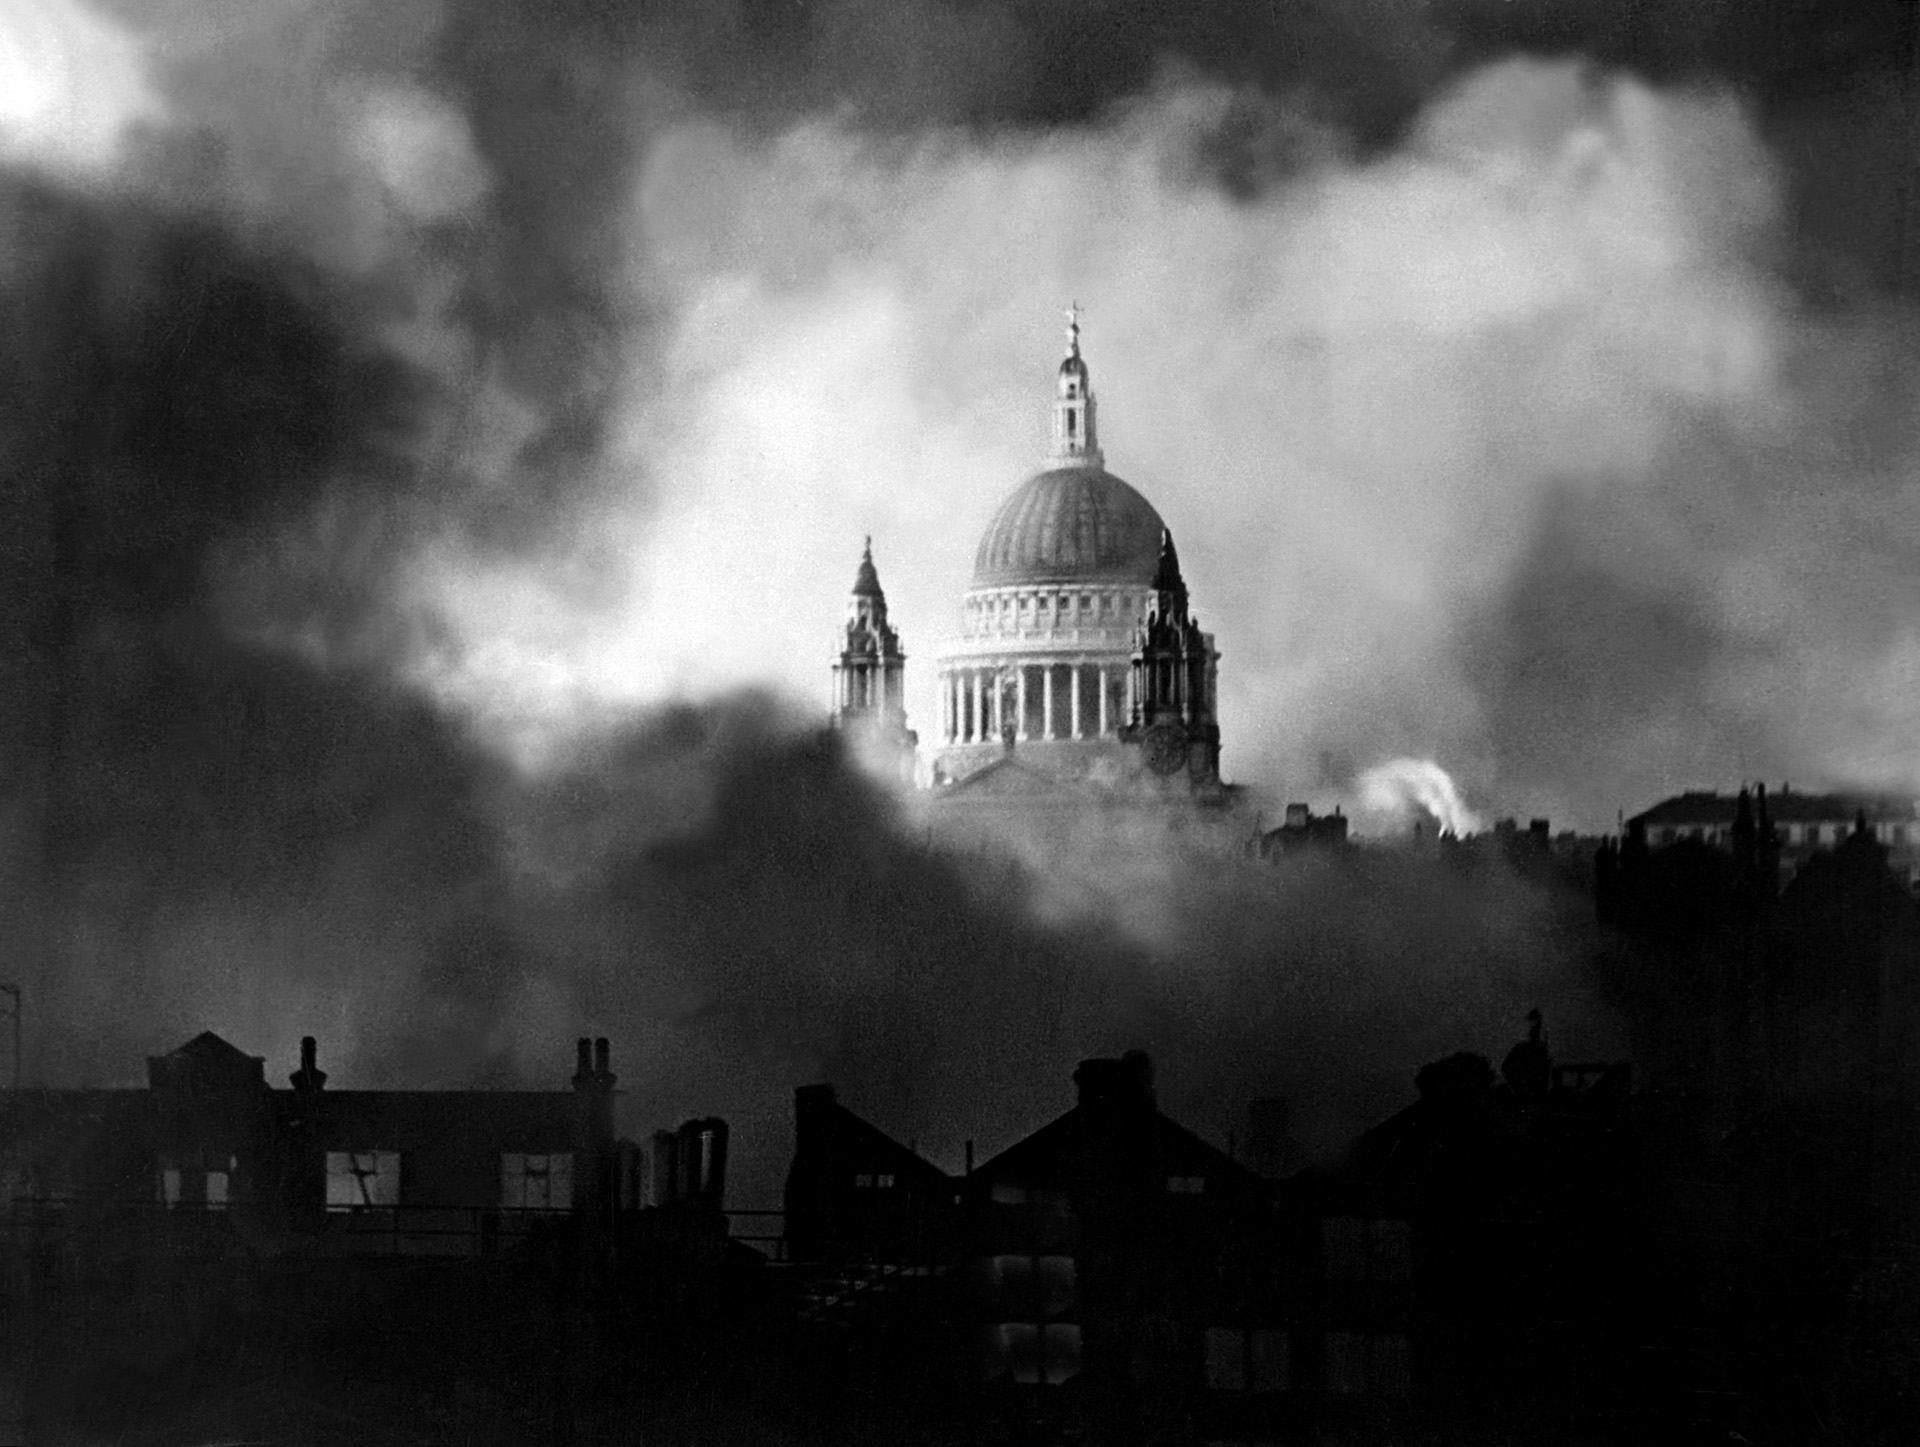 St Paul's Cathedral was hit several times, this major London landmark at the heart of the Blitz stood firm against the Luftwaffe, providing inspiration to Londoners.